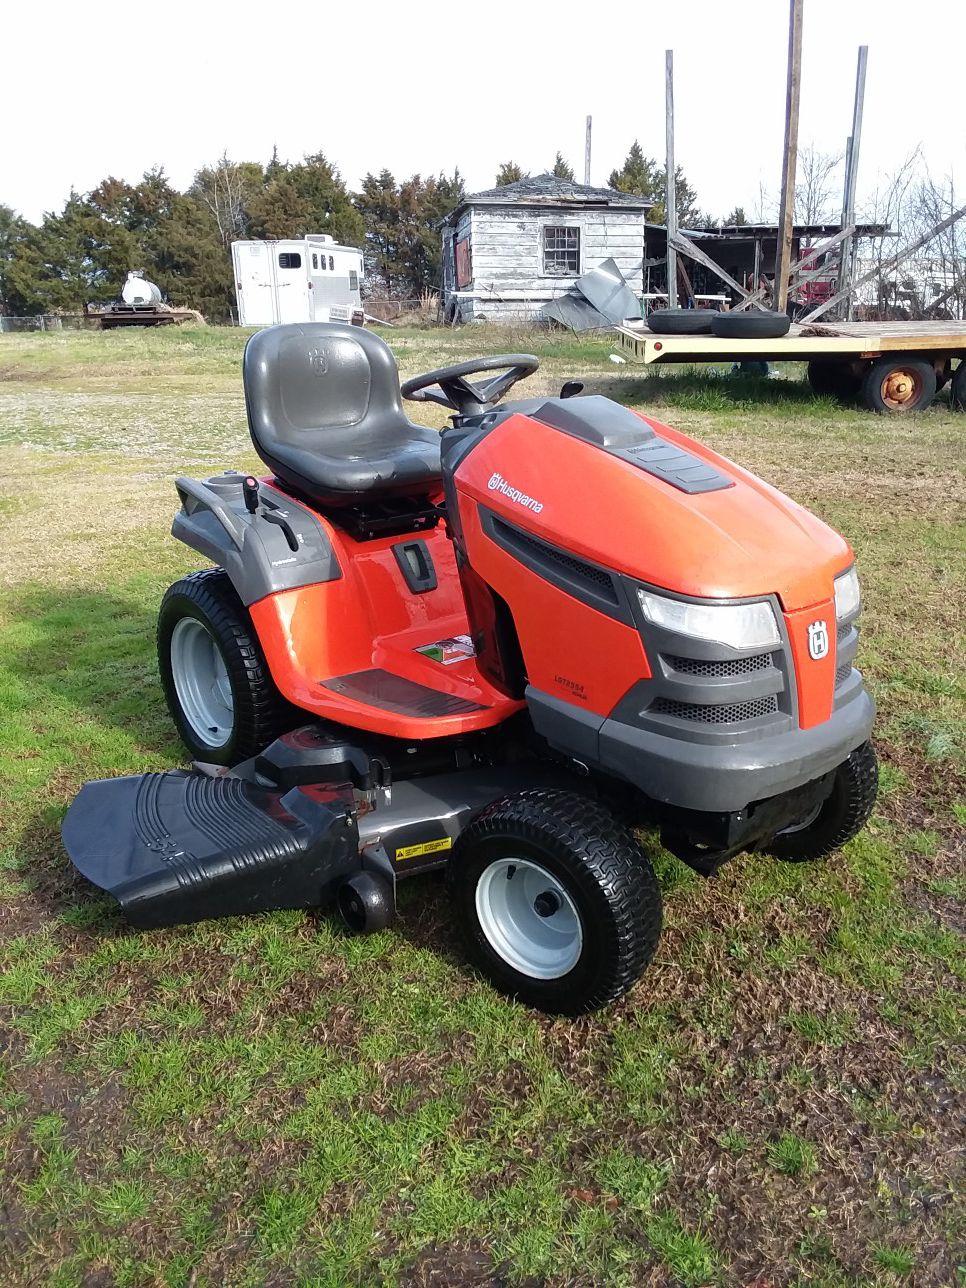 HUSQVARNA LGT-2554! lawn tractor, 25hp V-TWIN Kohler eng 54"cutt, auto trans, runs an works great it's a (BEAST) of a mower! Asking $1200 obo..